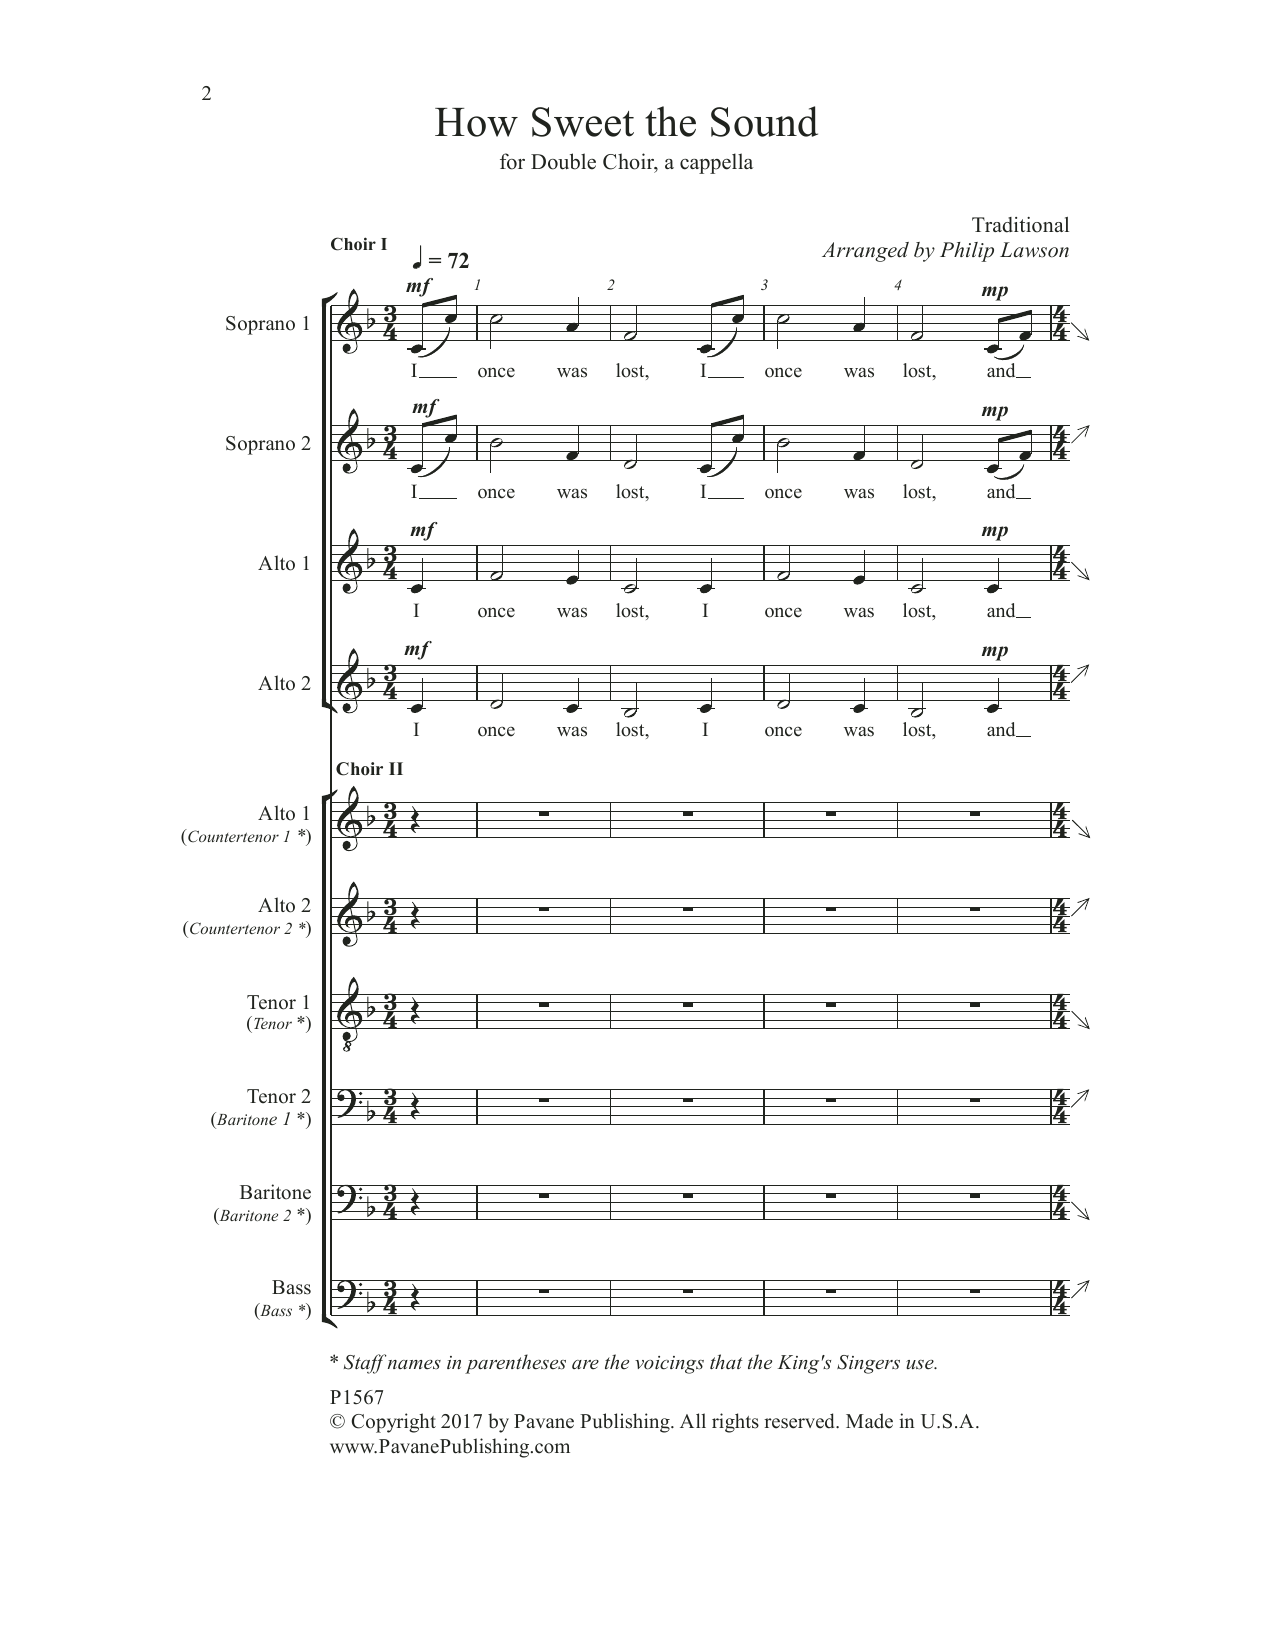 Download Philip Lawson How Sweet the Sound Sheet Music